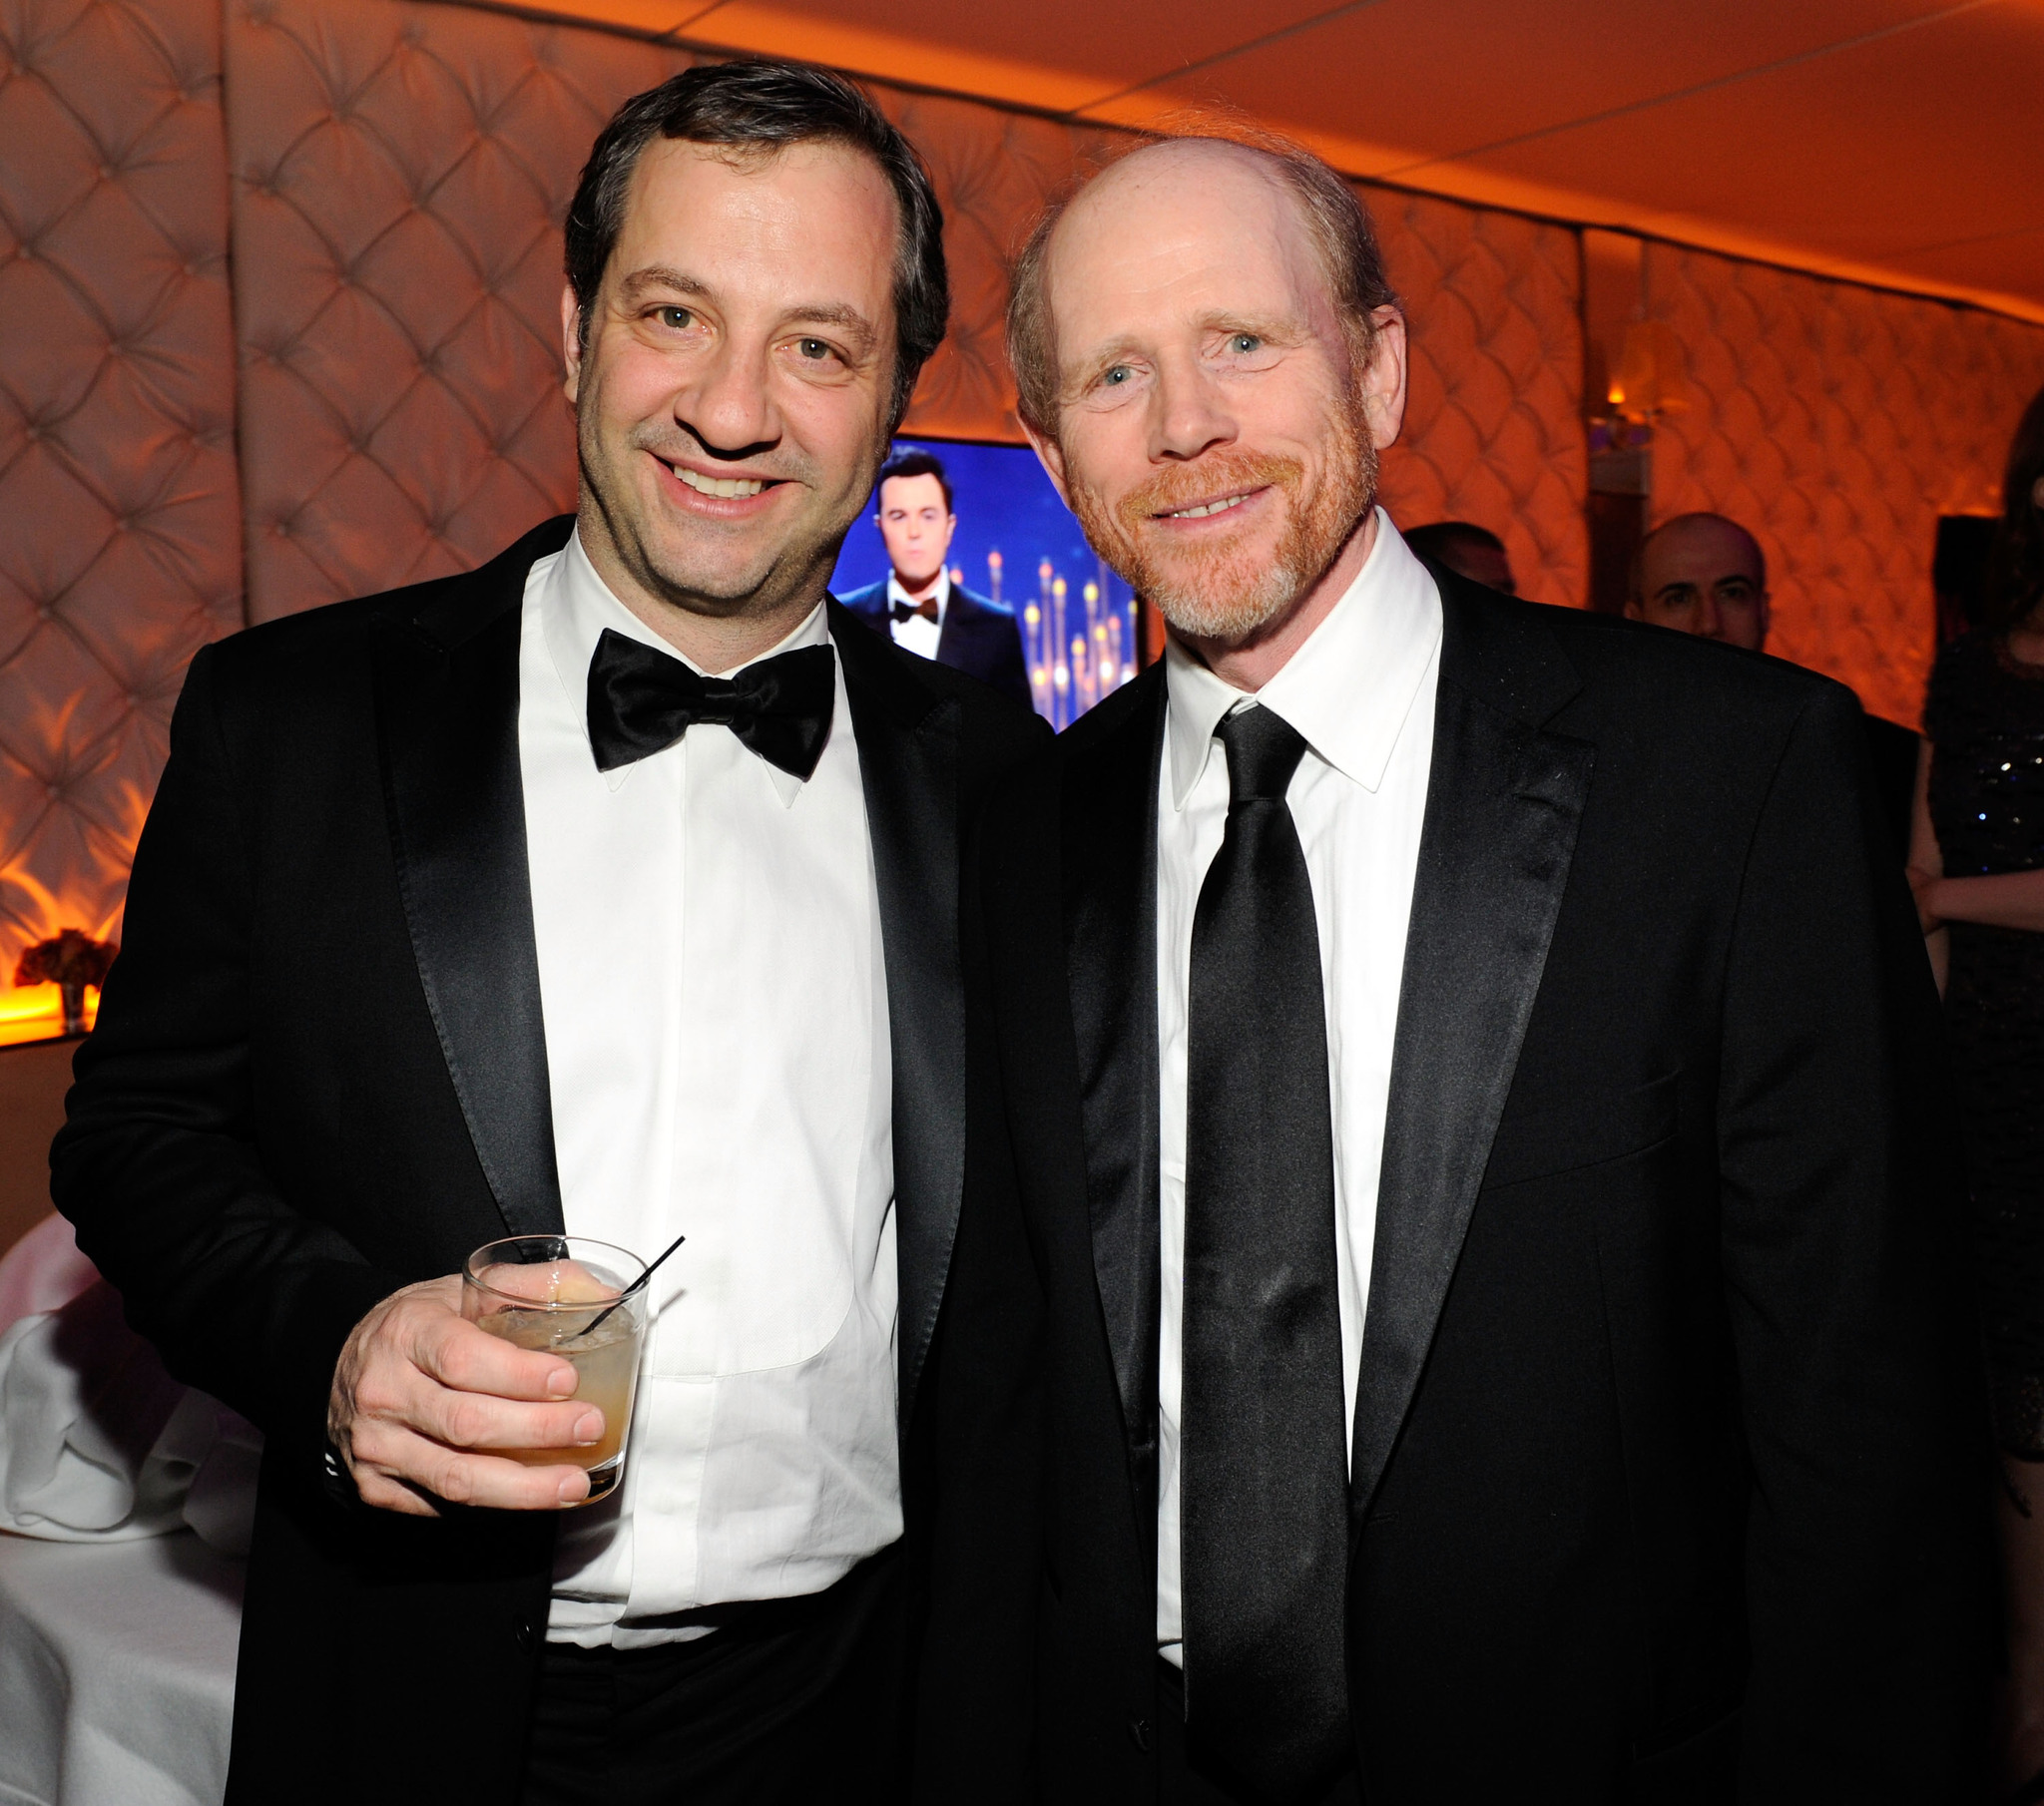 Ron Howard and Judd Apatow